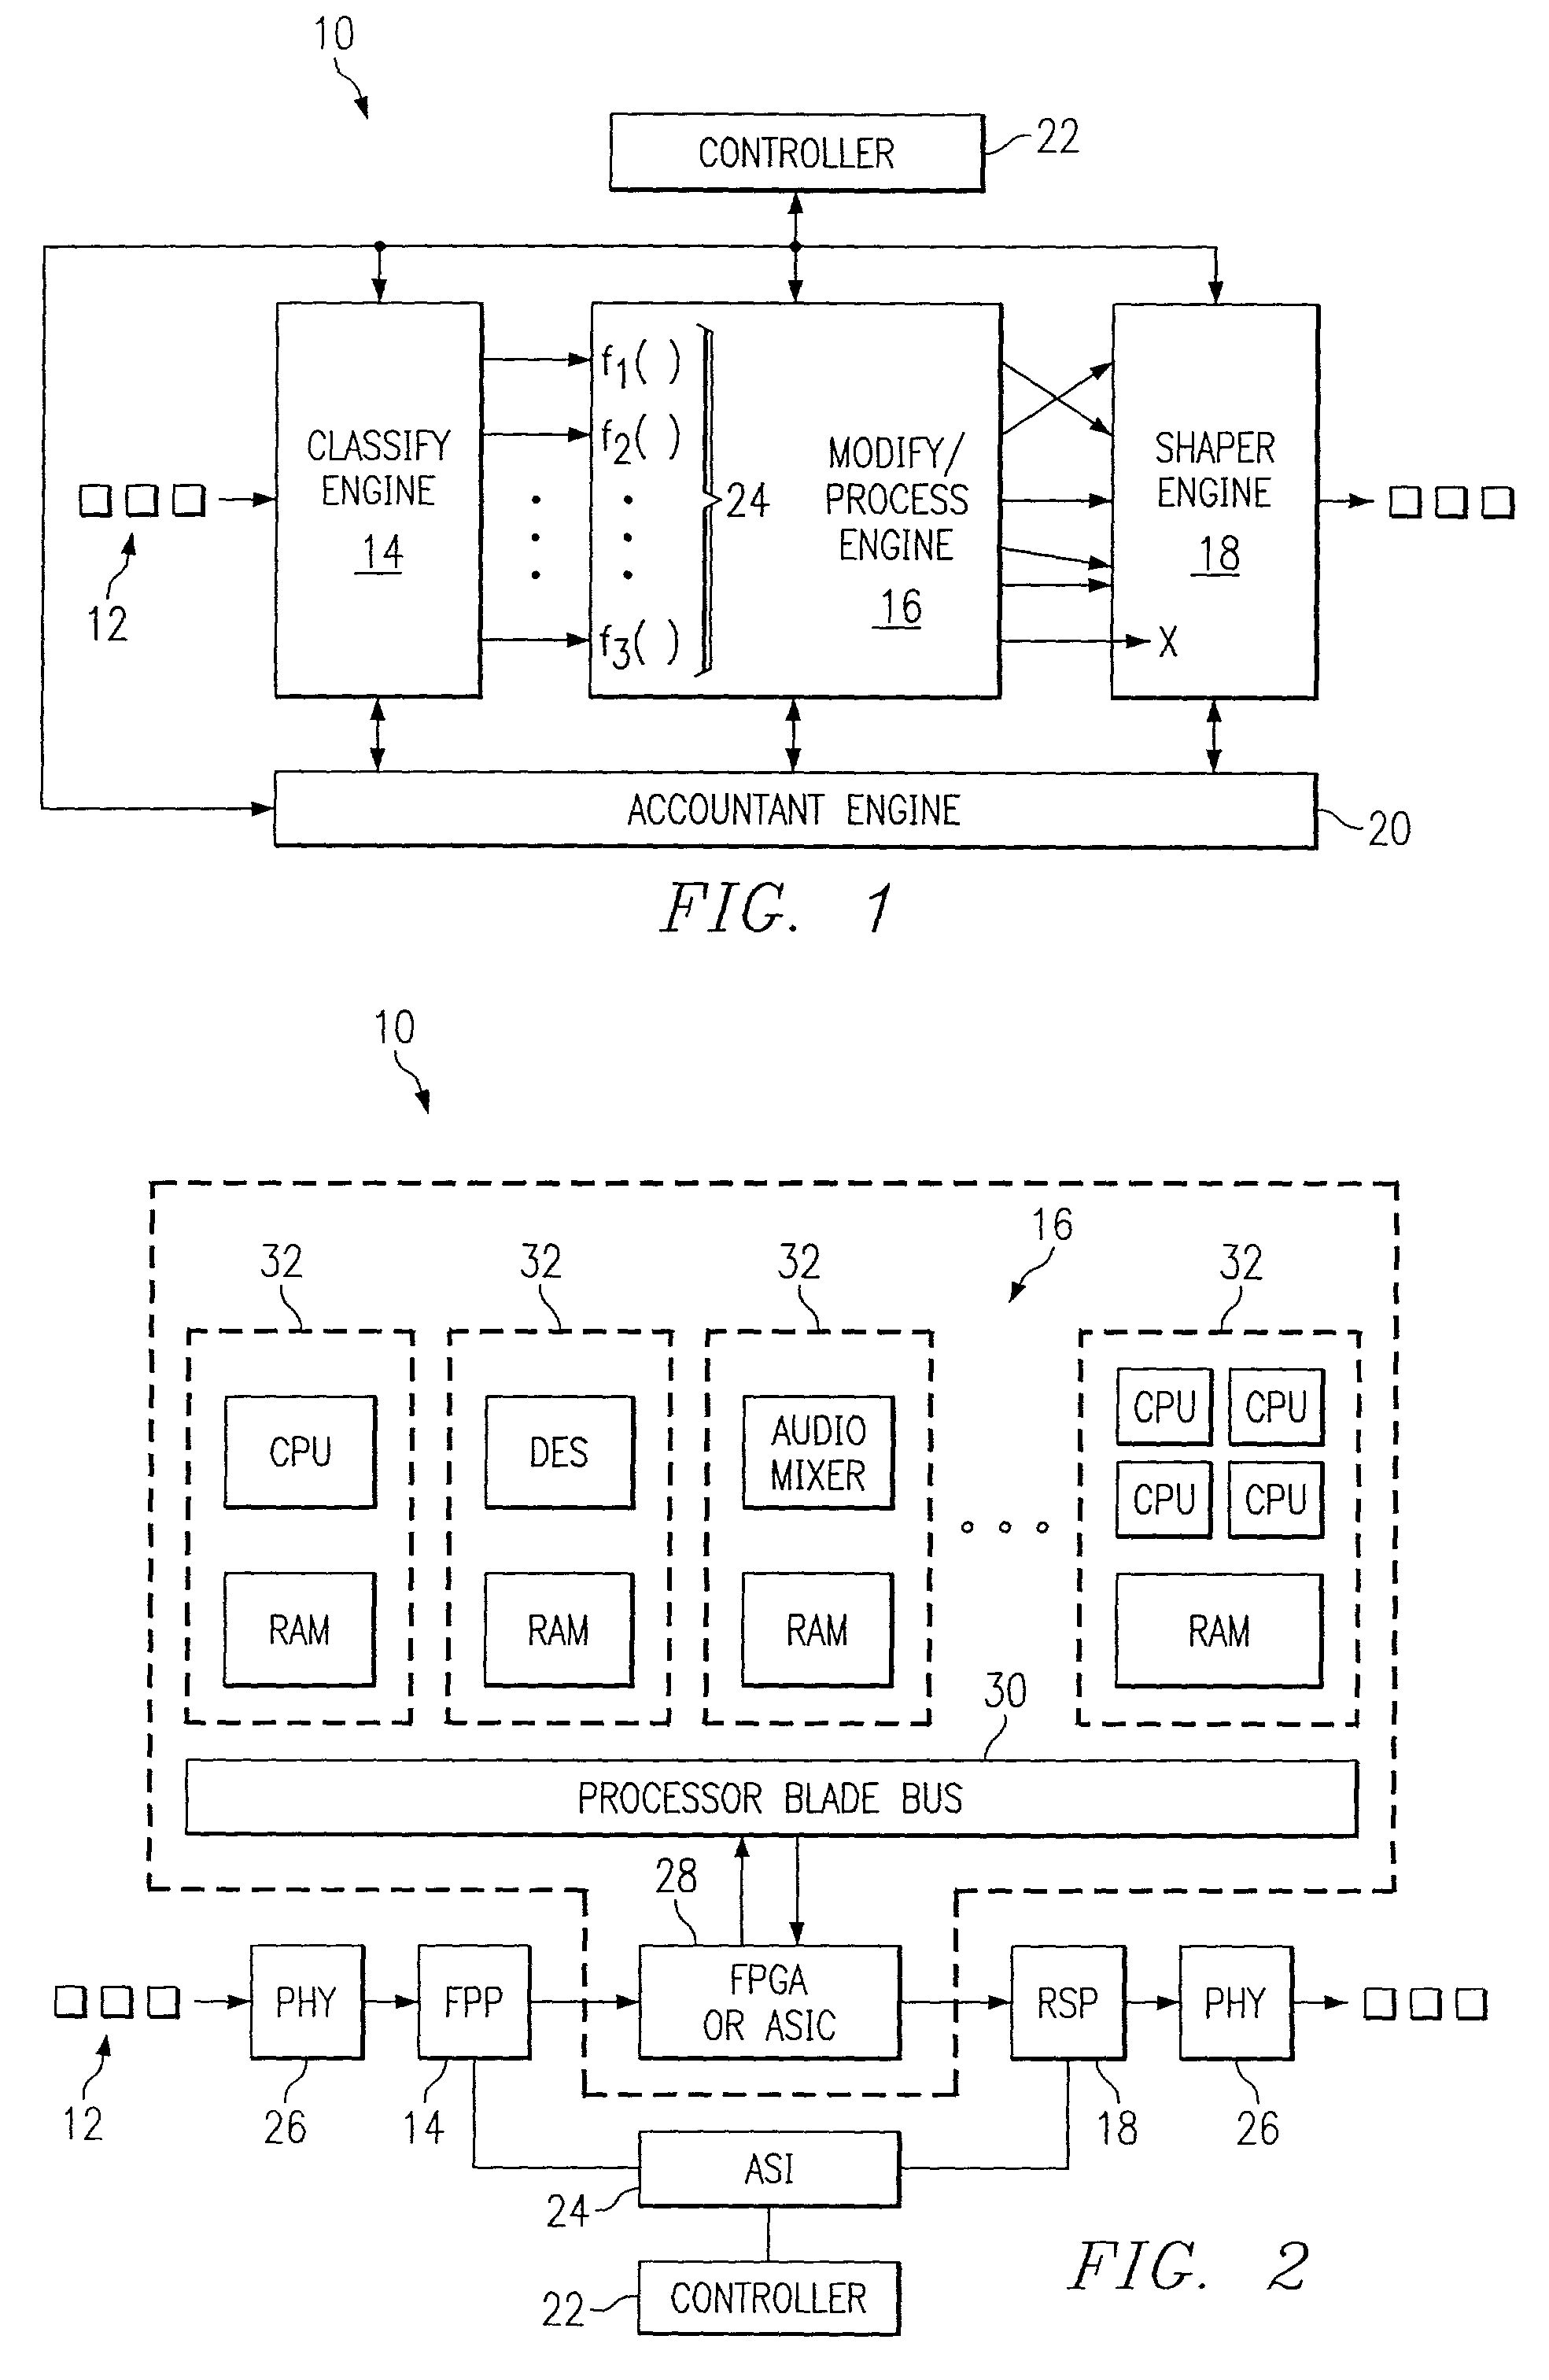 System and method for processing network packet flows